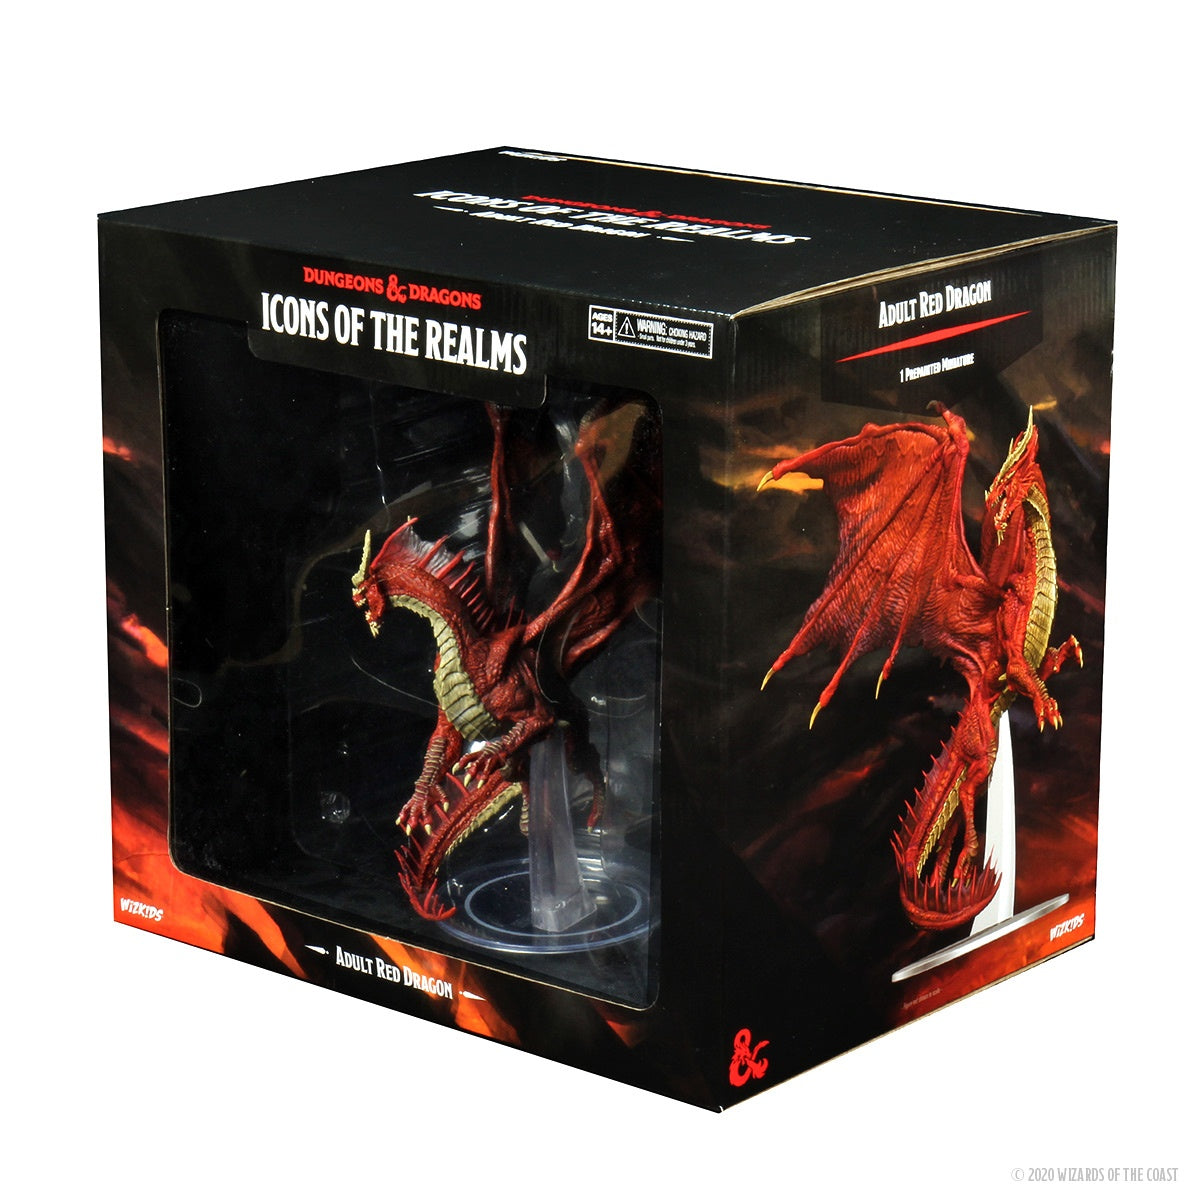 Icons of the Realms - Adult Red Dragon